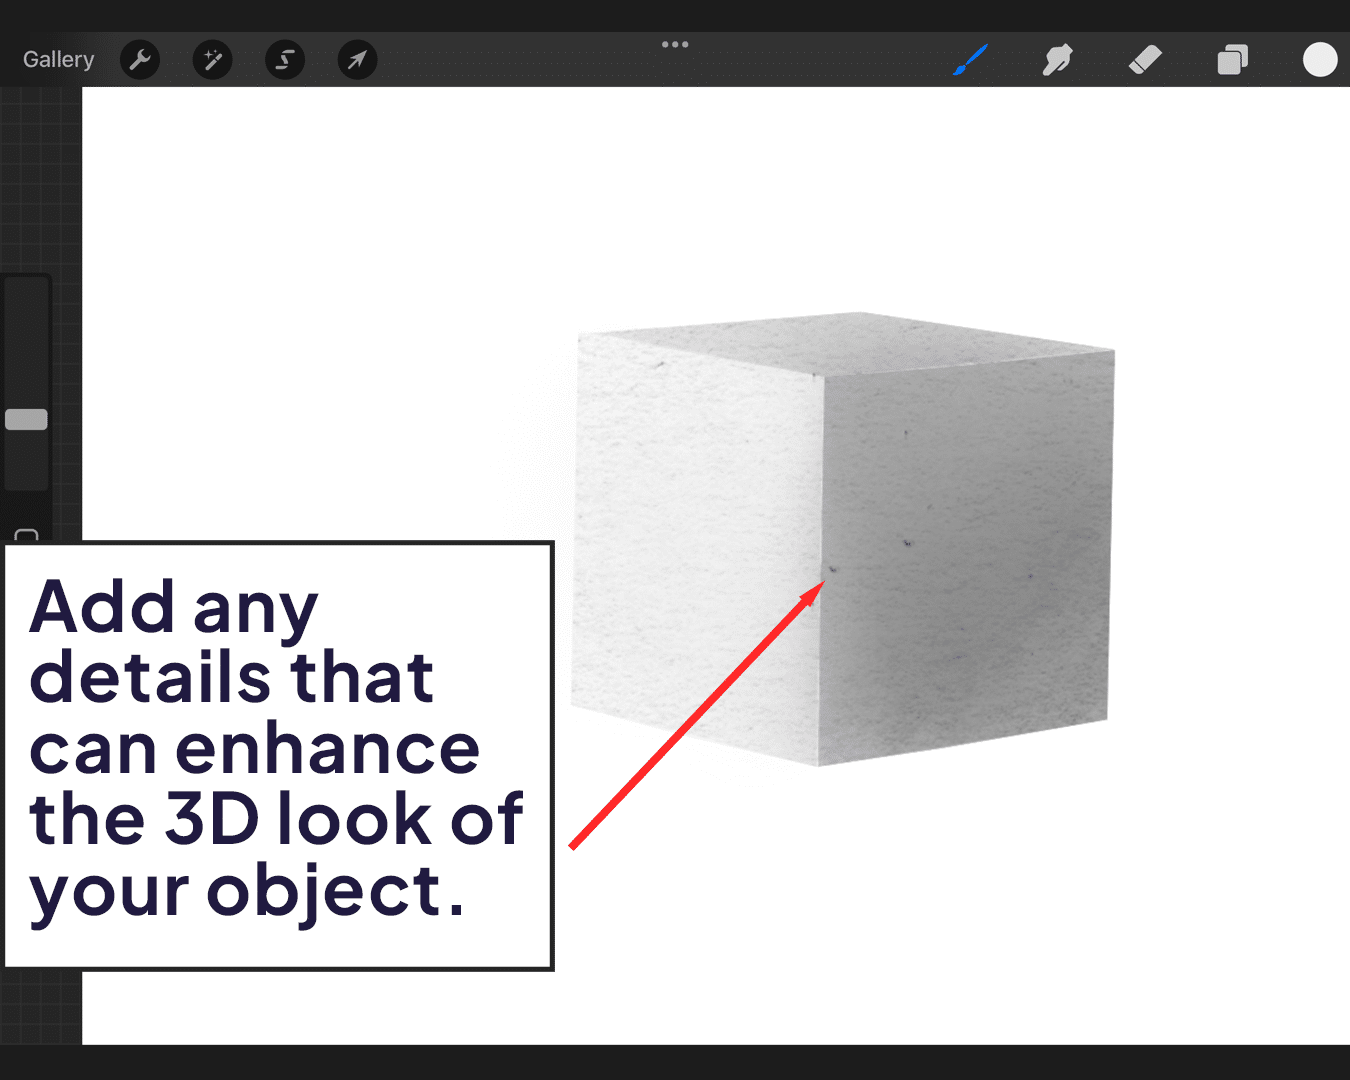 Enhance the 3D look with details